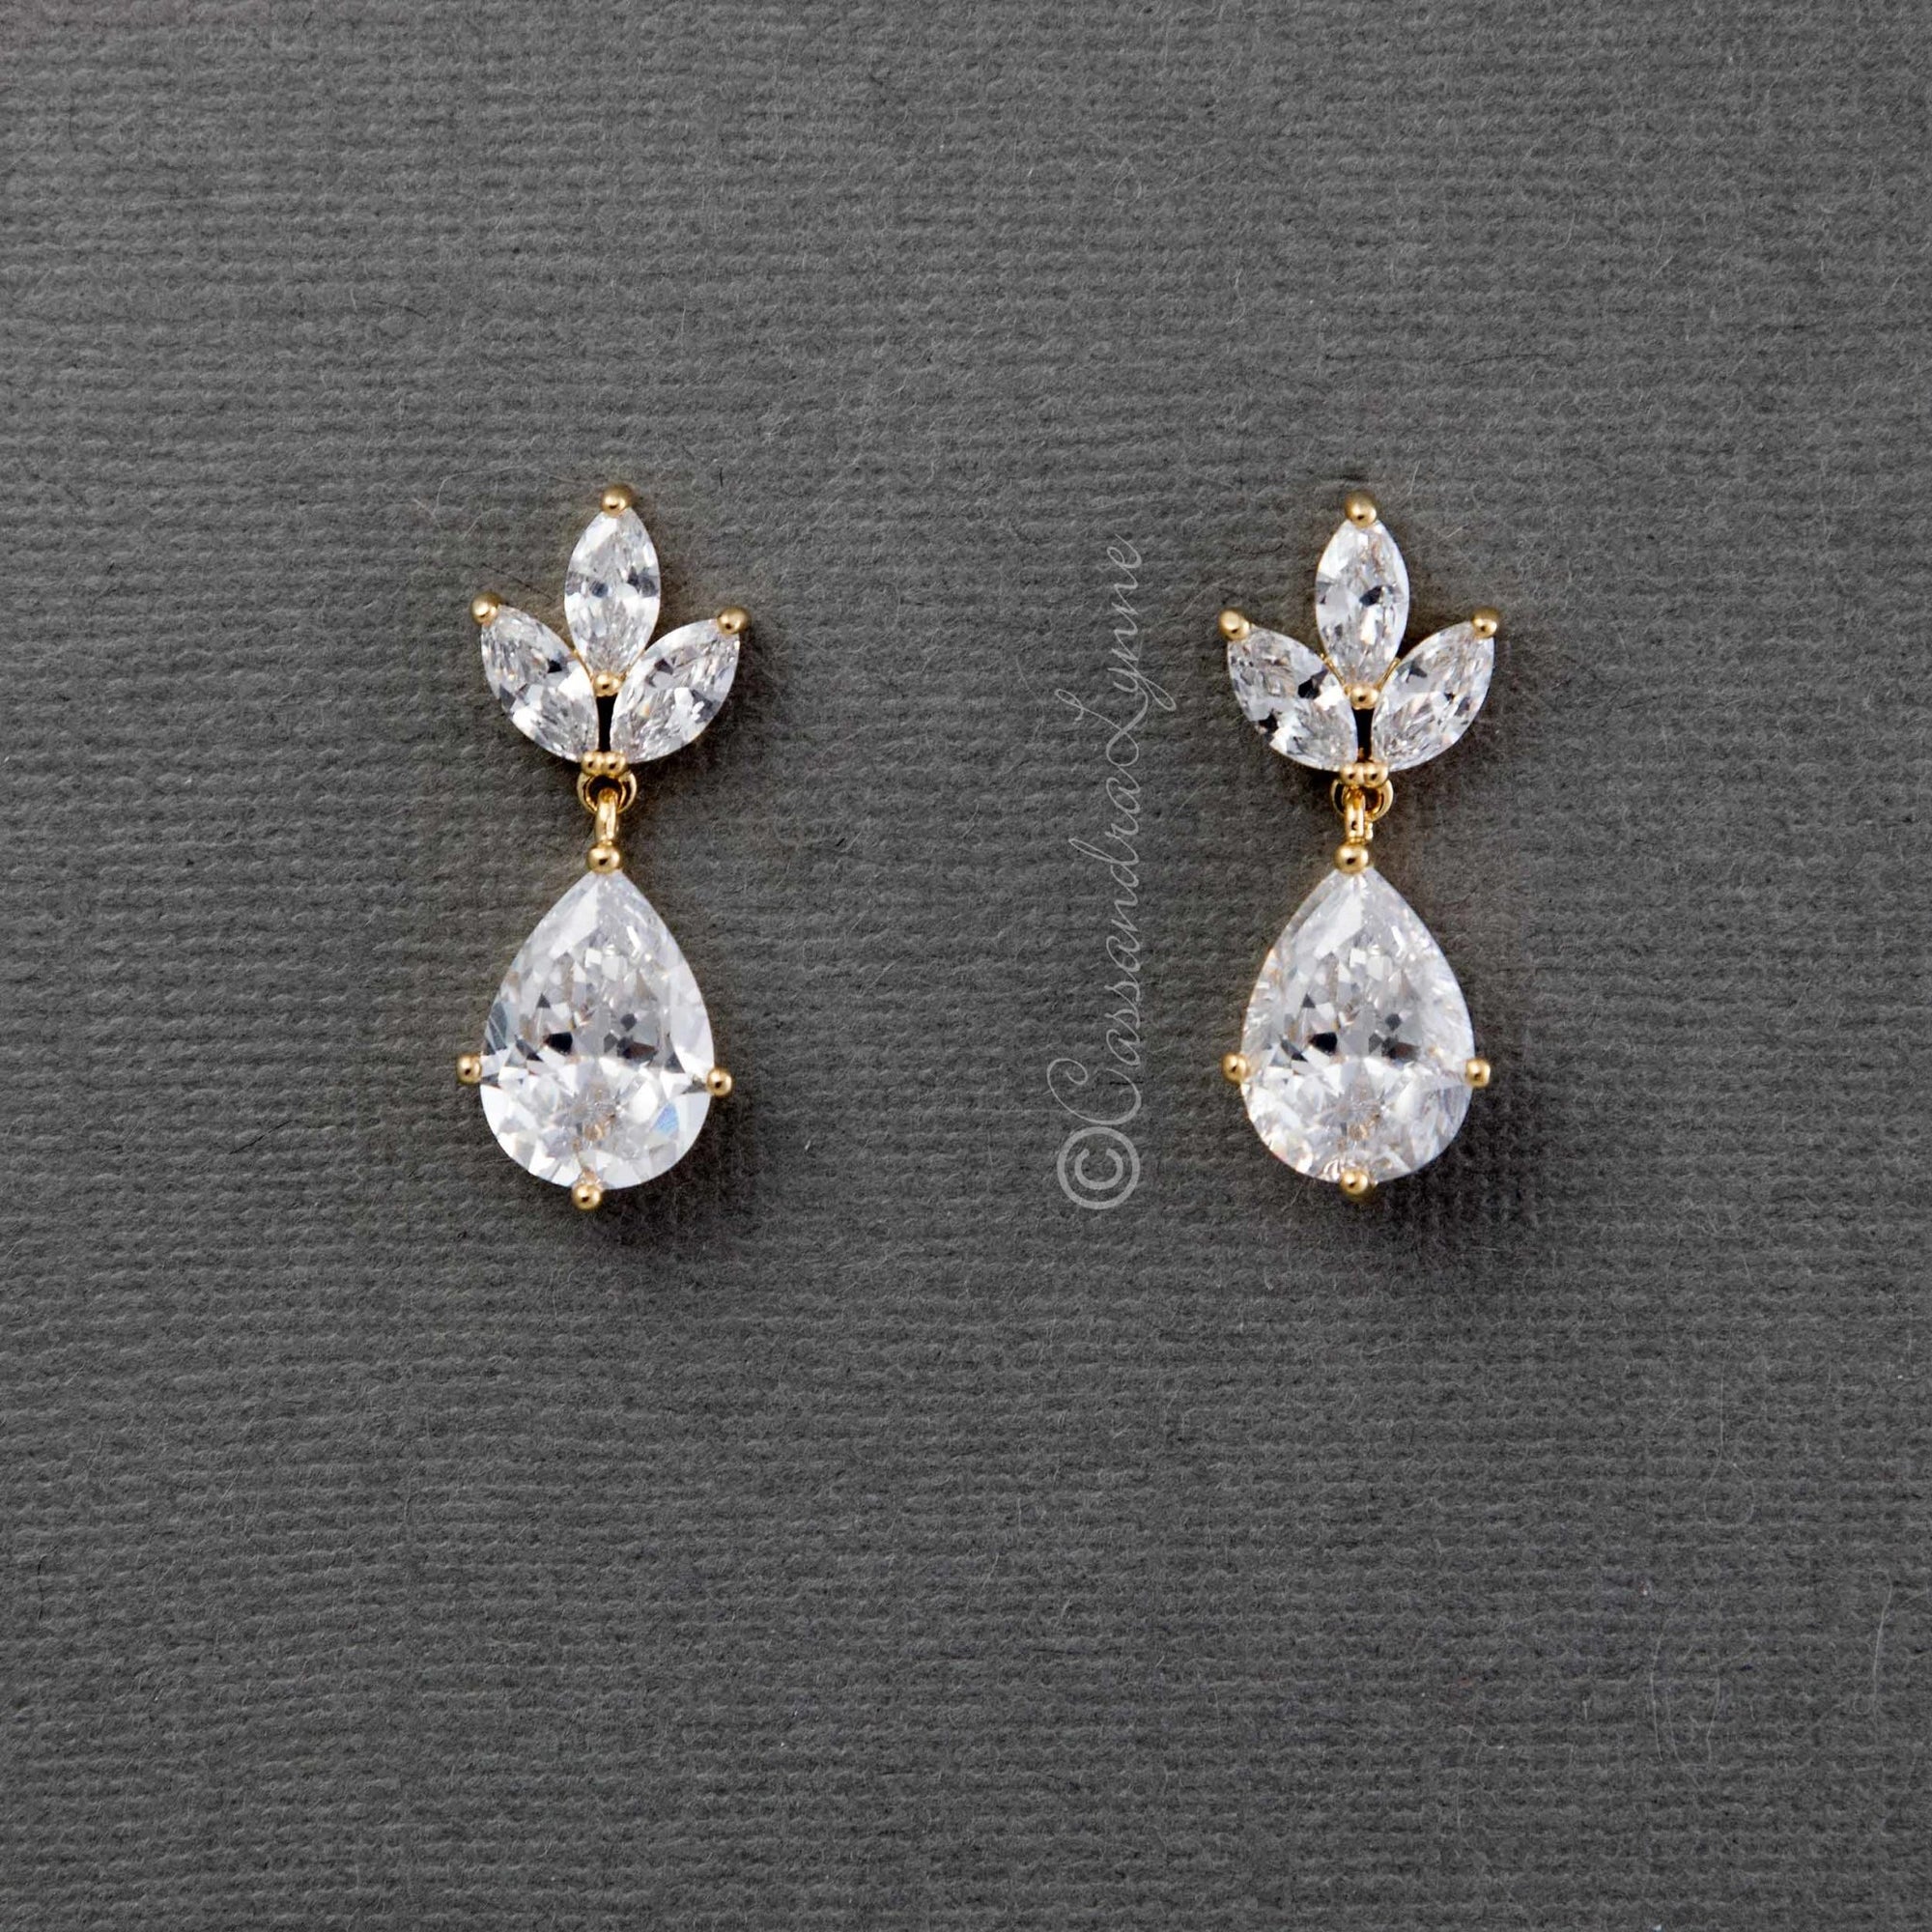 Wedding Day Bridal Earrings Cubic Zirconia and Pearl - Cassandra Lynne